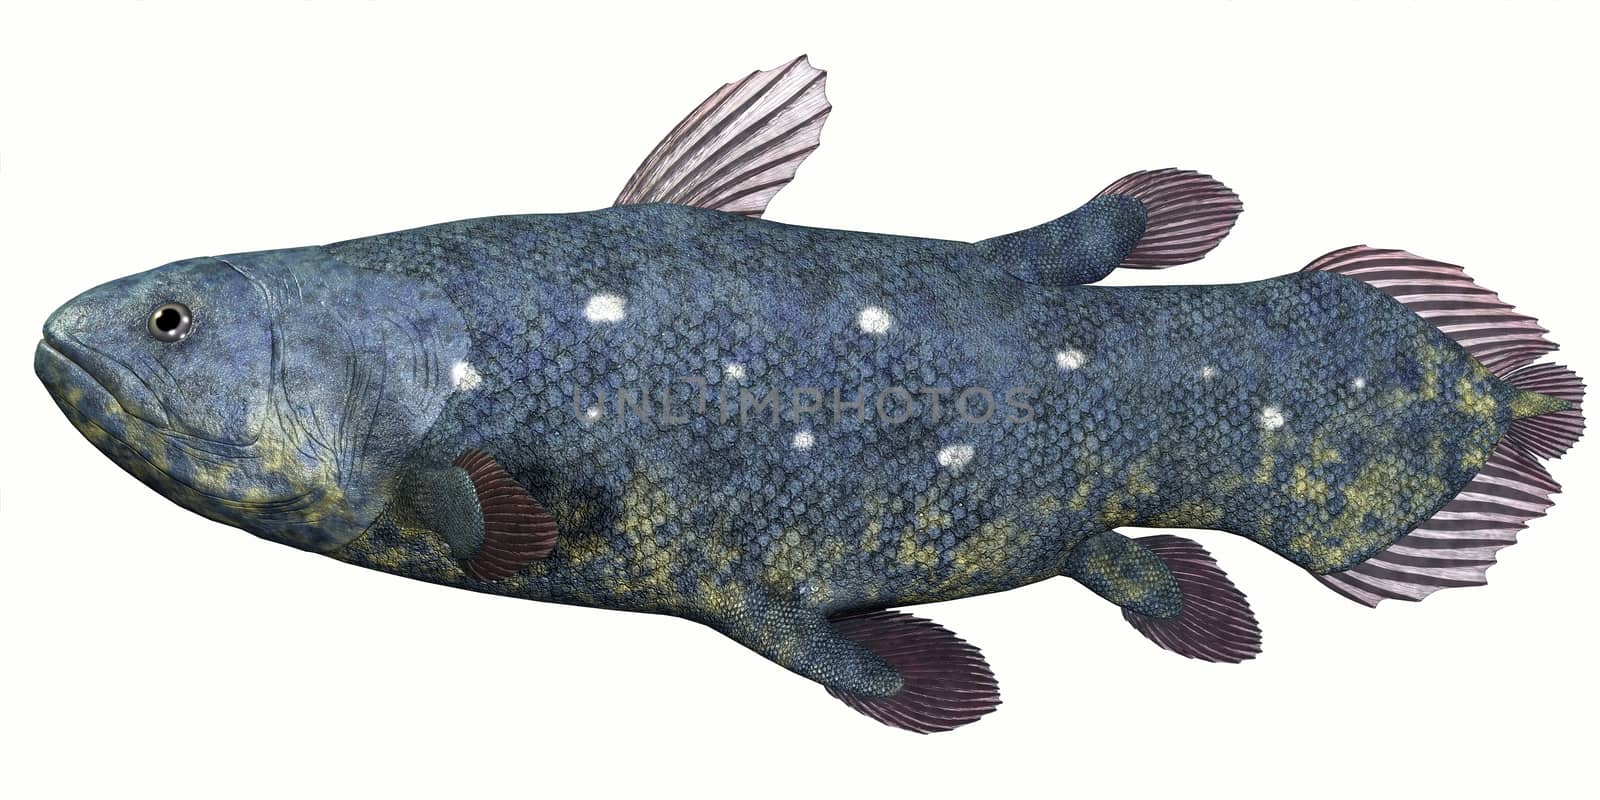 Coelacanth Fish over White by Catmando